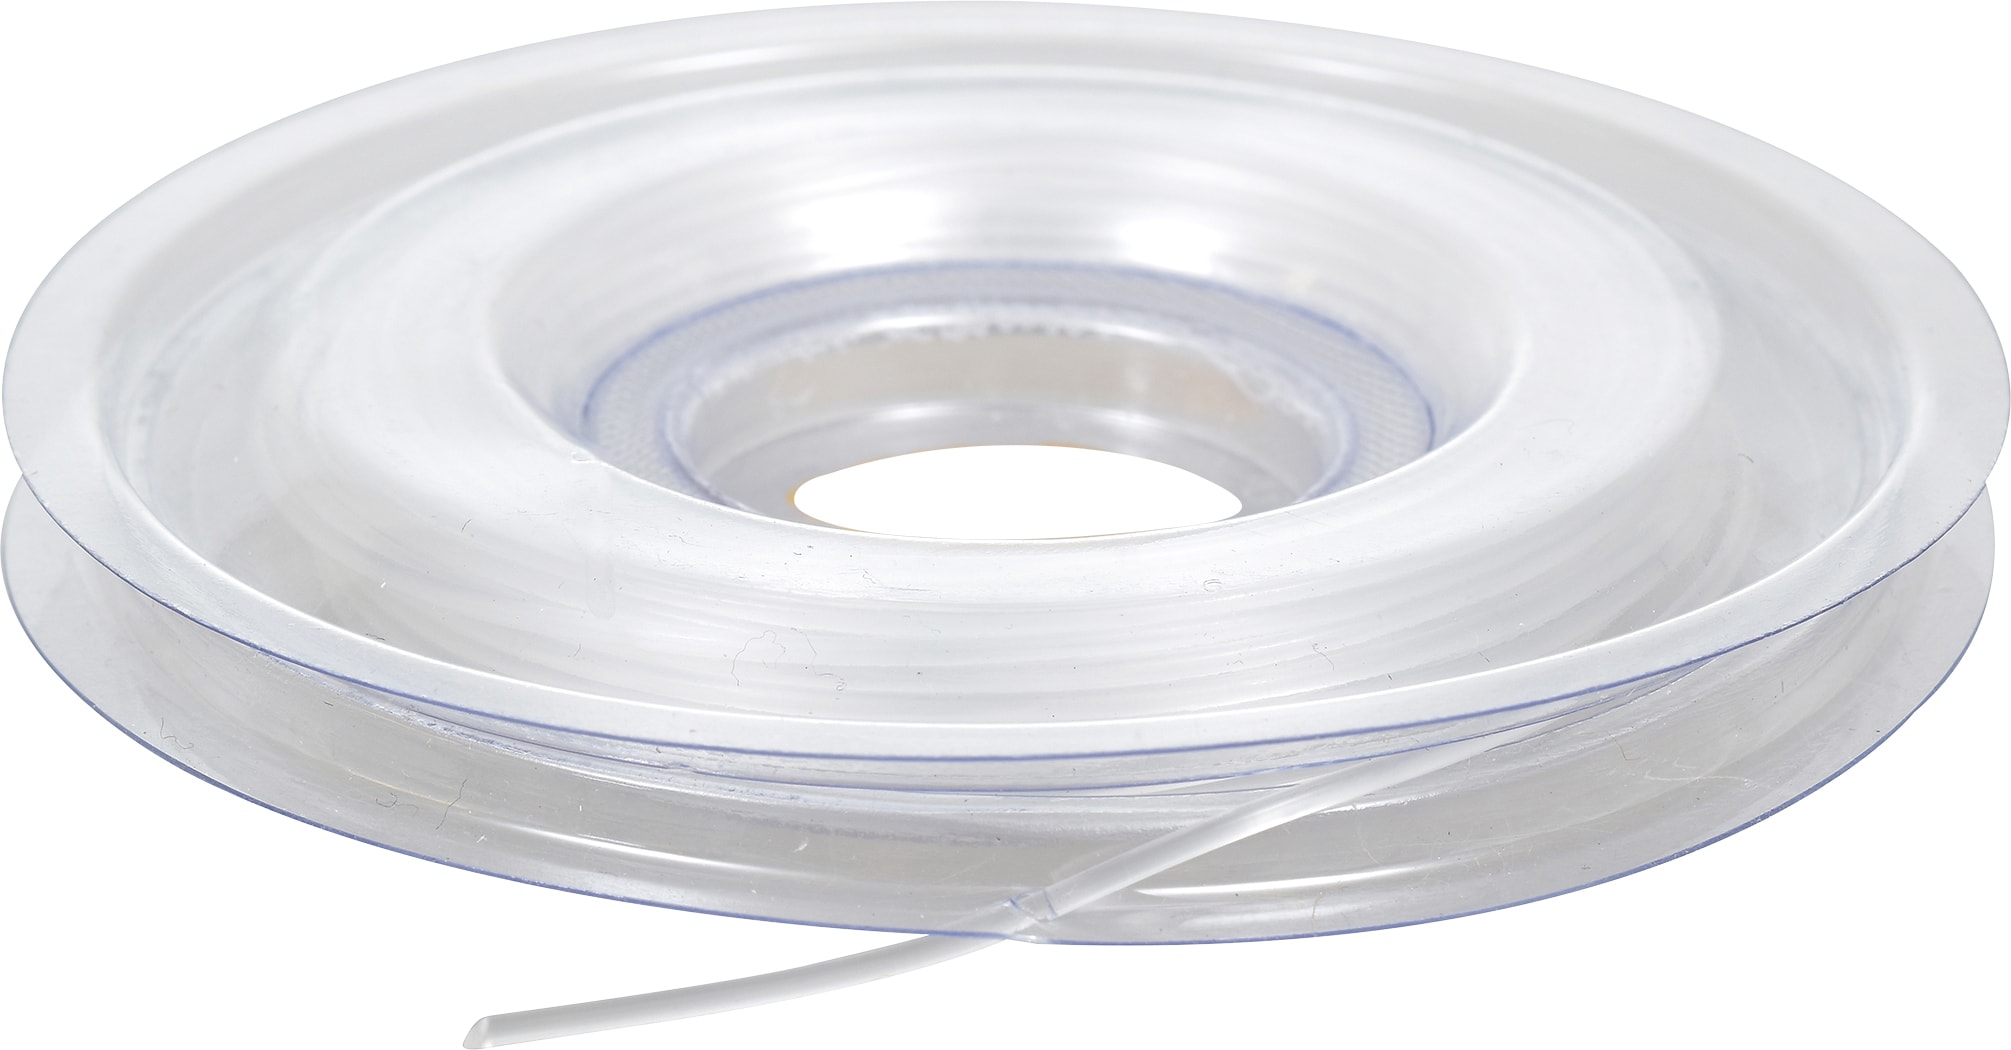 Hillman Invisible Wire, So-ft and Flexible, 50-lb Capacity, 15-ft